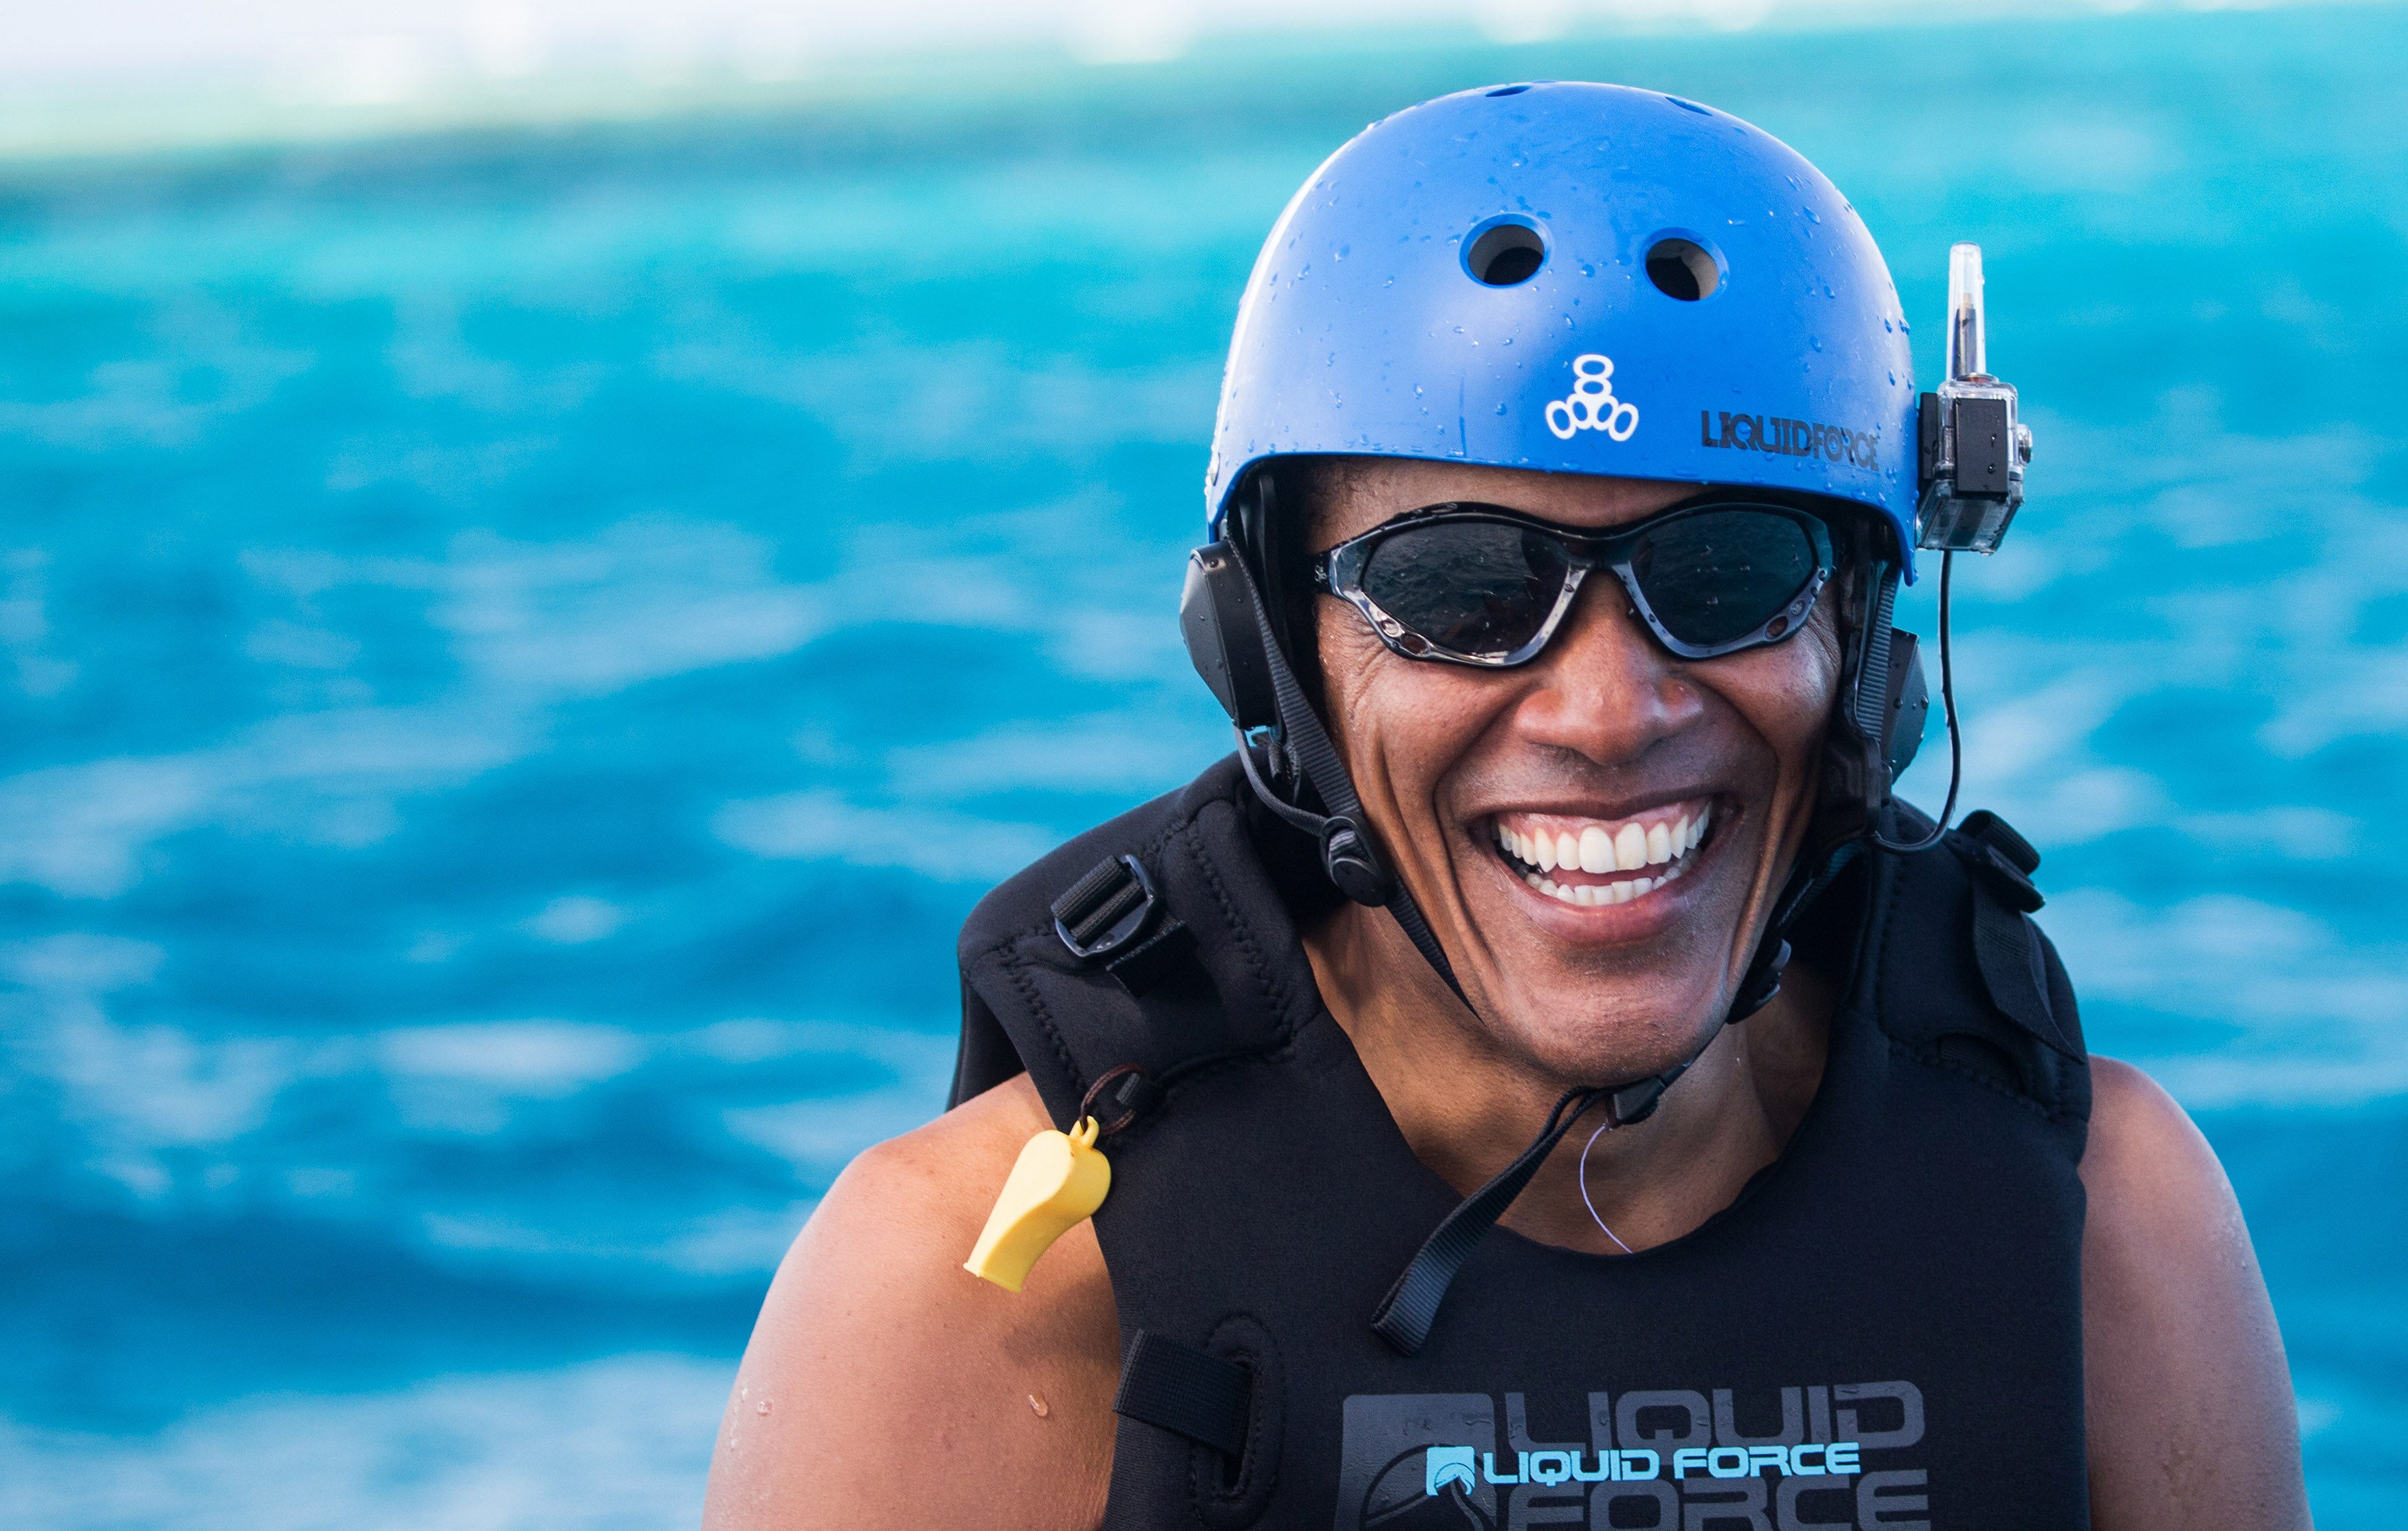 14 Photos Of Obama Post-Presidency That Prove He's Living His Best Life
